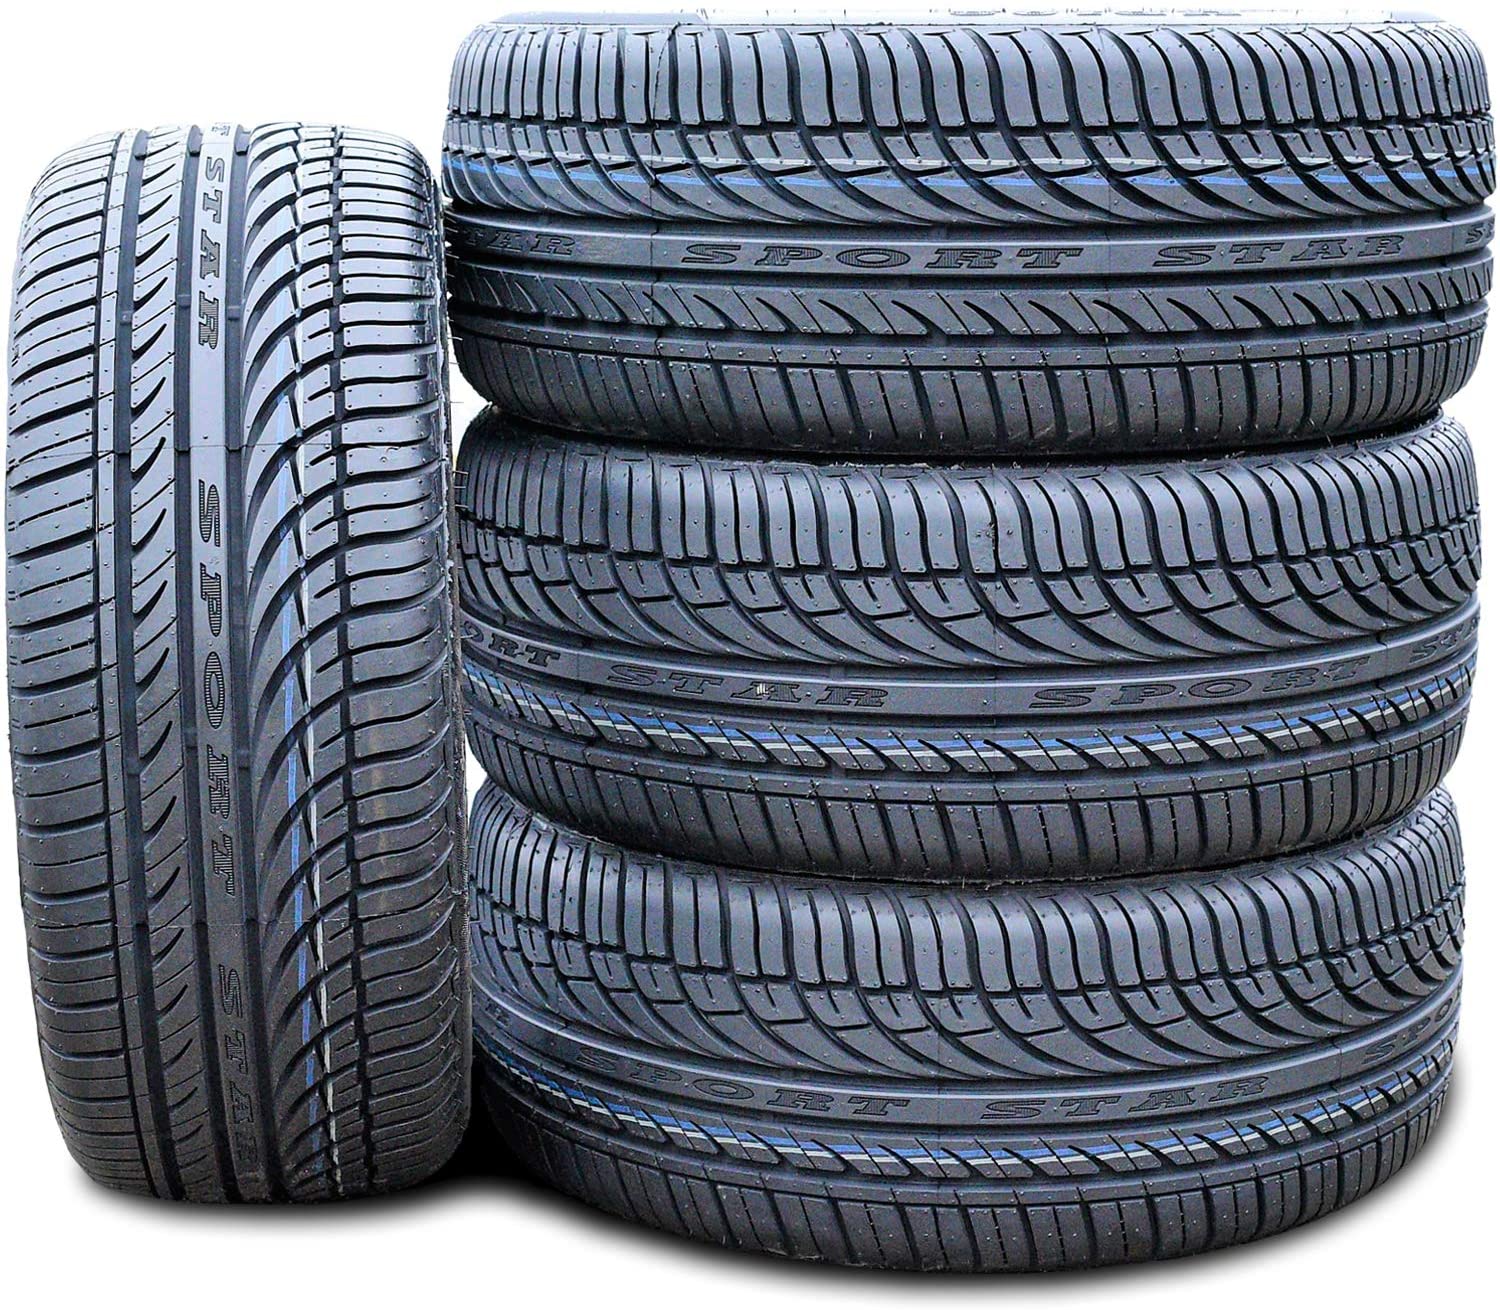 Affordable Tires At Taylors Affiliated Bargains